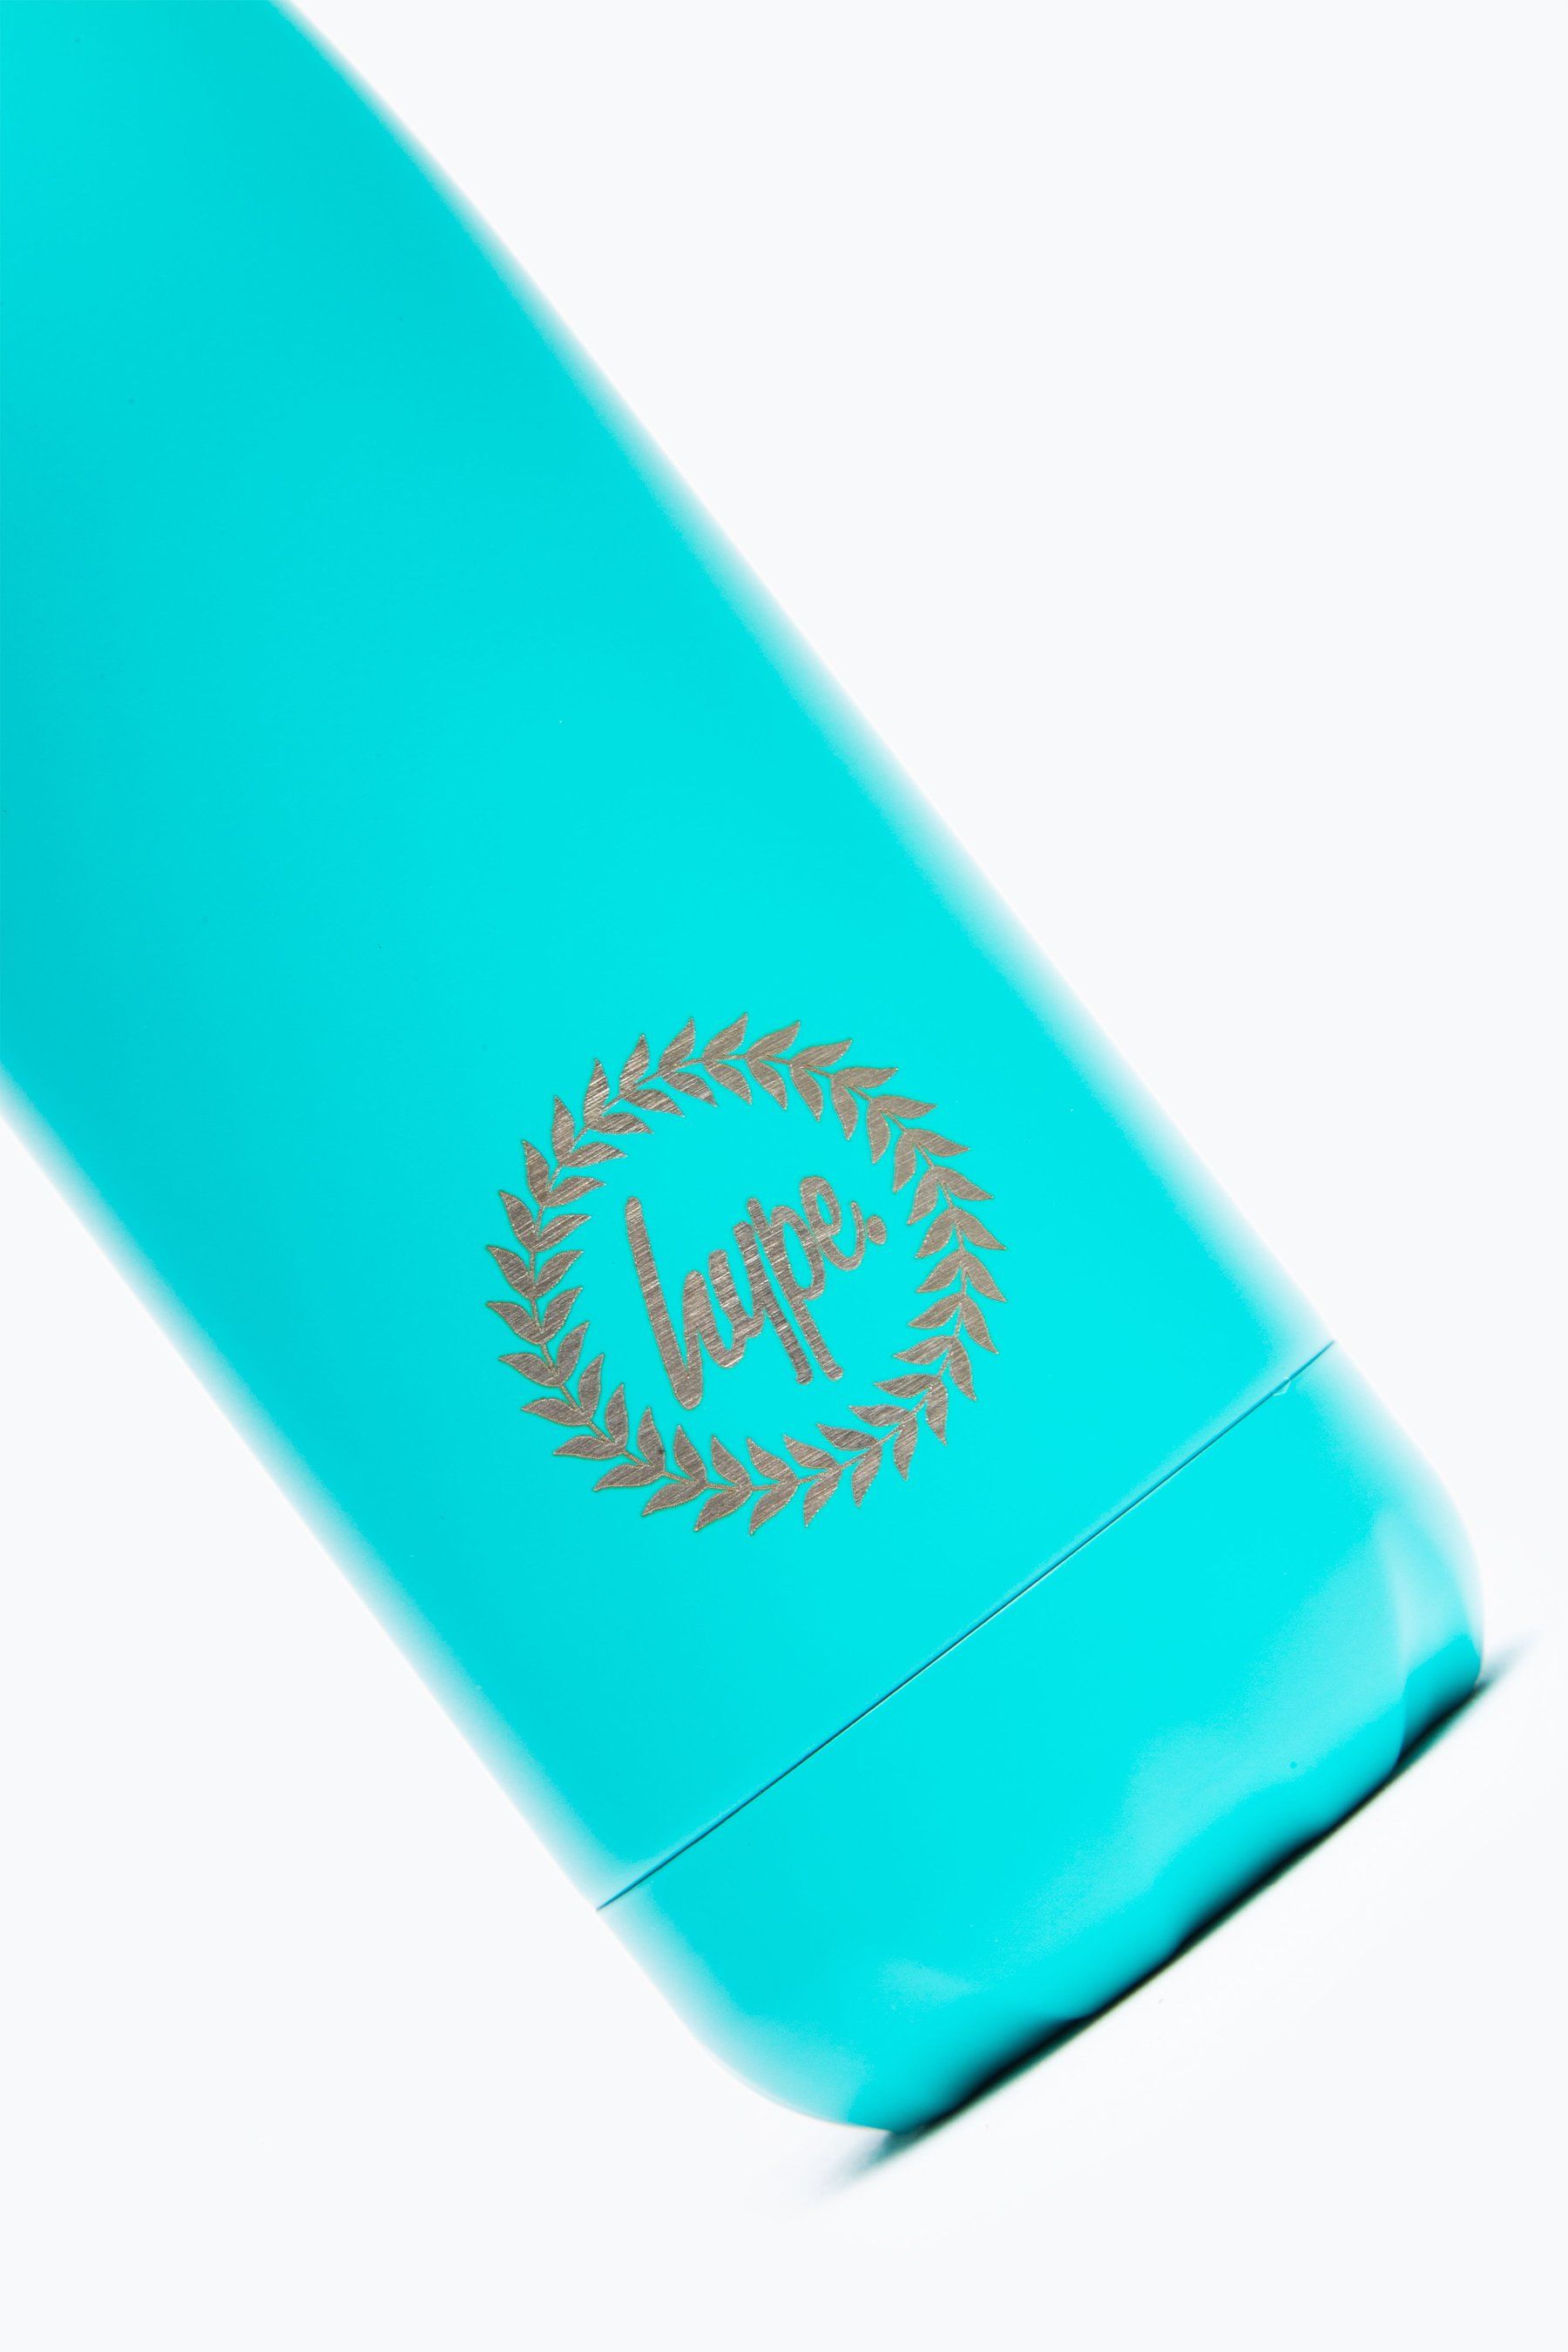 Keeping you hydrated, in style. Meet the HYPE. Mint Metal Reusable Bottle, perfect for when you're on the go. Designed in BPA-FREE stainless steel aluminium to ensure your water stays ice-cold and for chillier days, keeping your oat milk latte warm for longer. Finished with the iconic HYPE. Crest Logo. Reuse it again and again with an airtight screw lid prevents spills. Why not grab one of our lunch bags or backpacks with a bottle holder to complete the look.